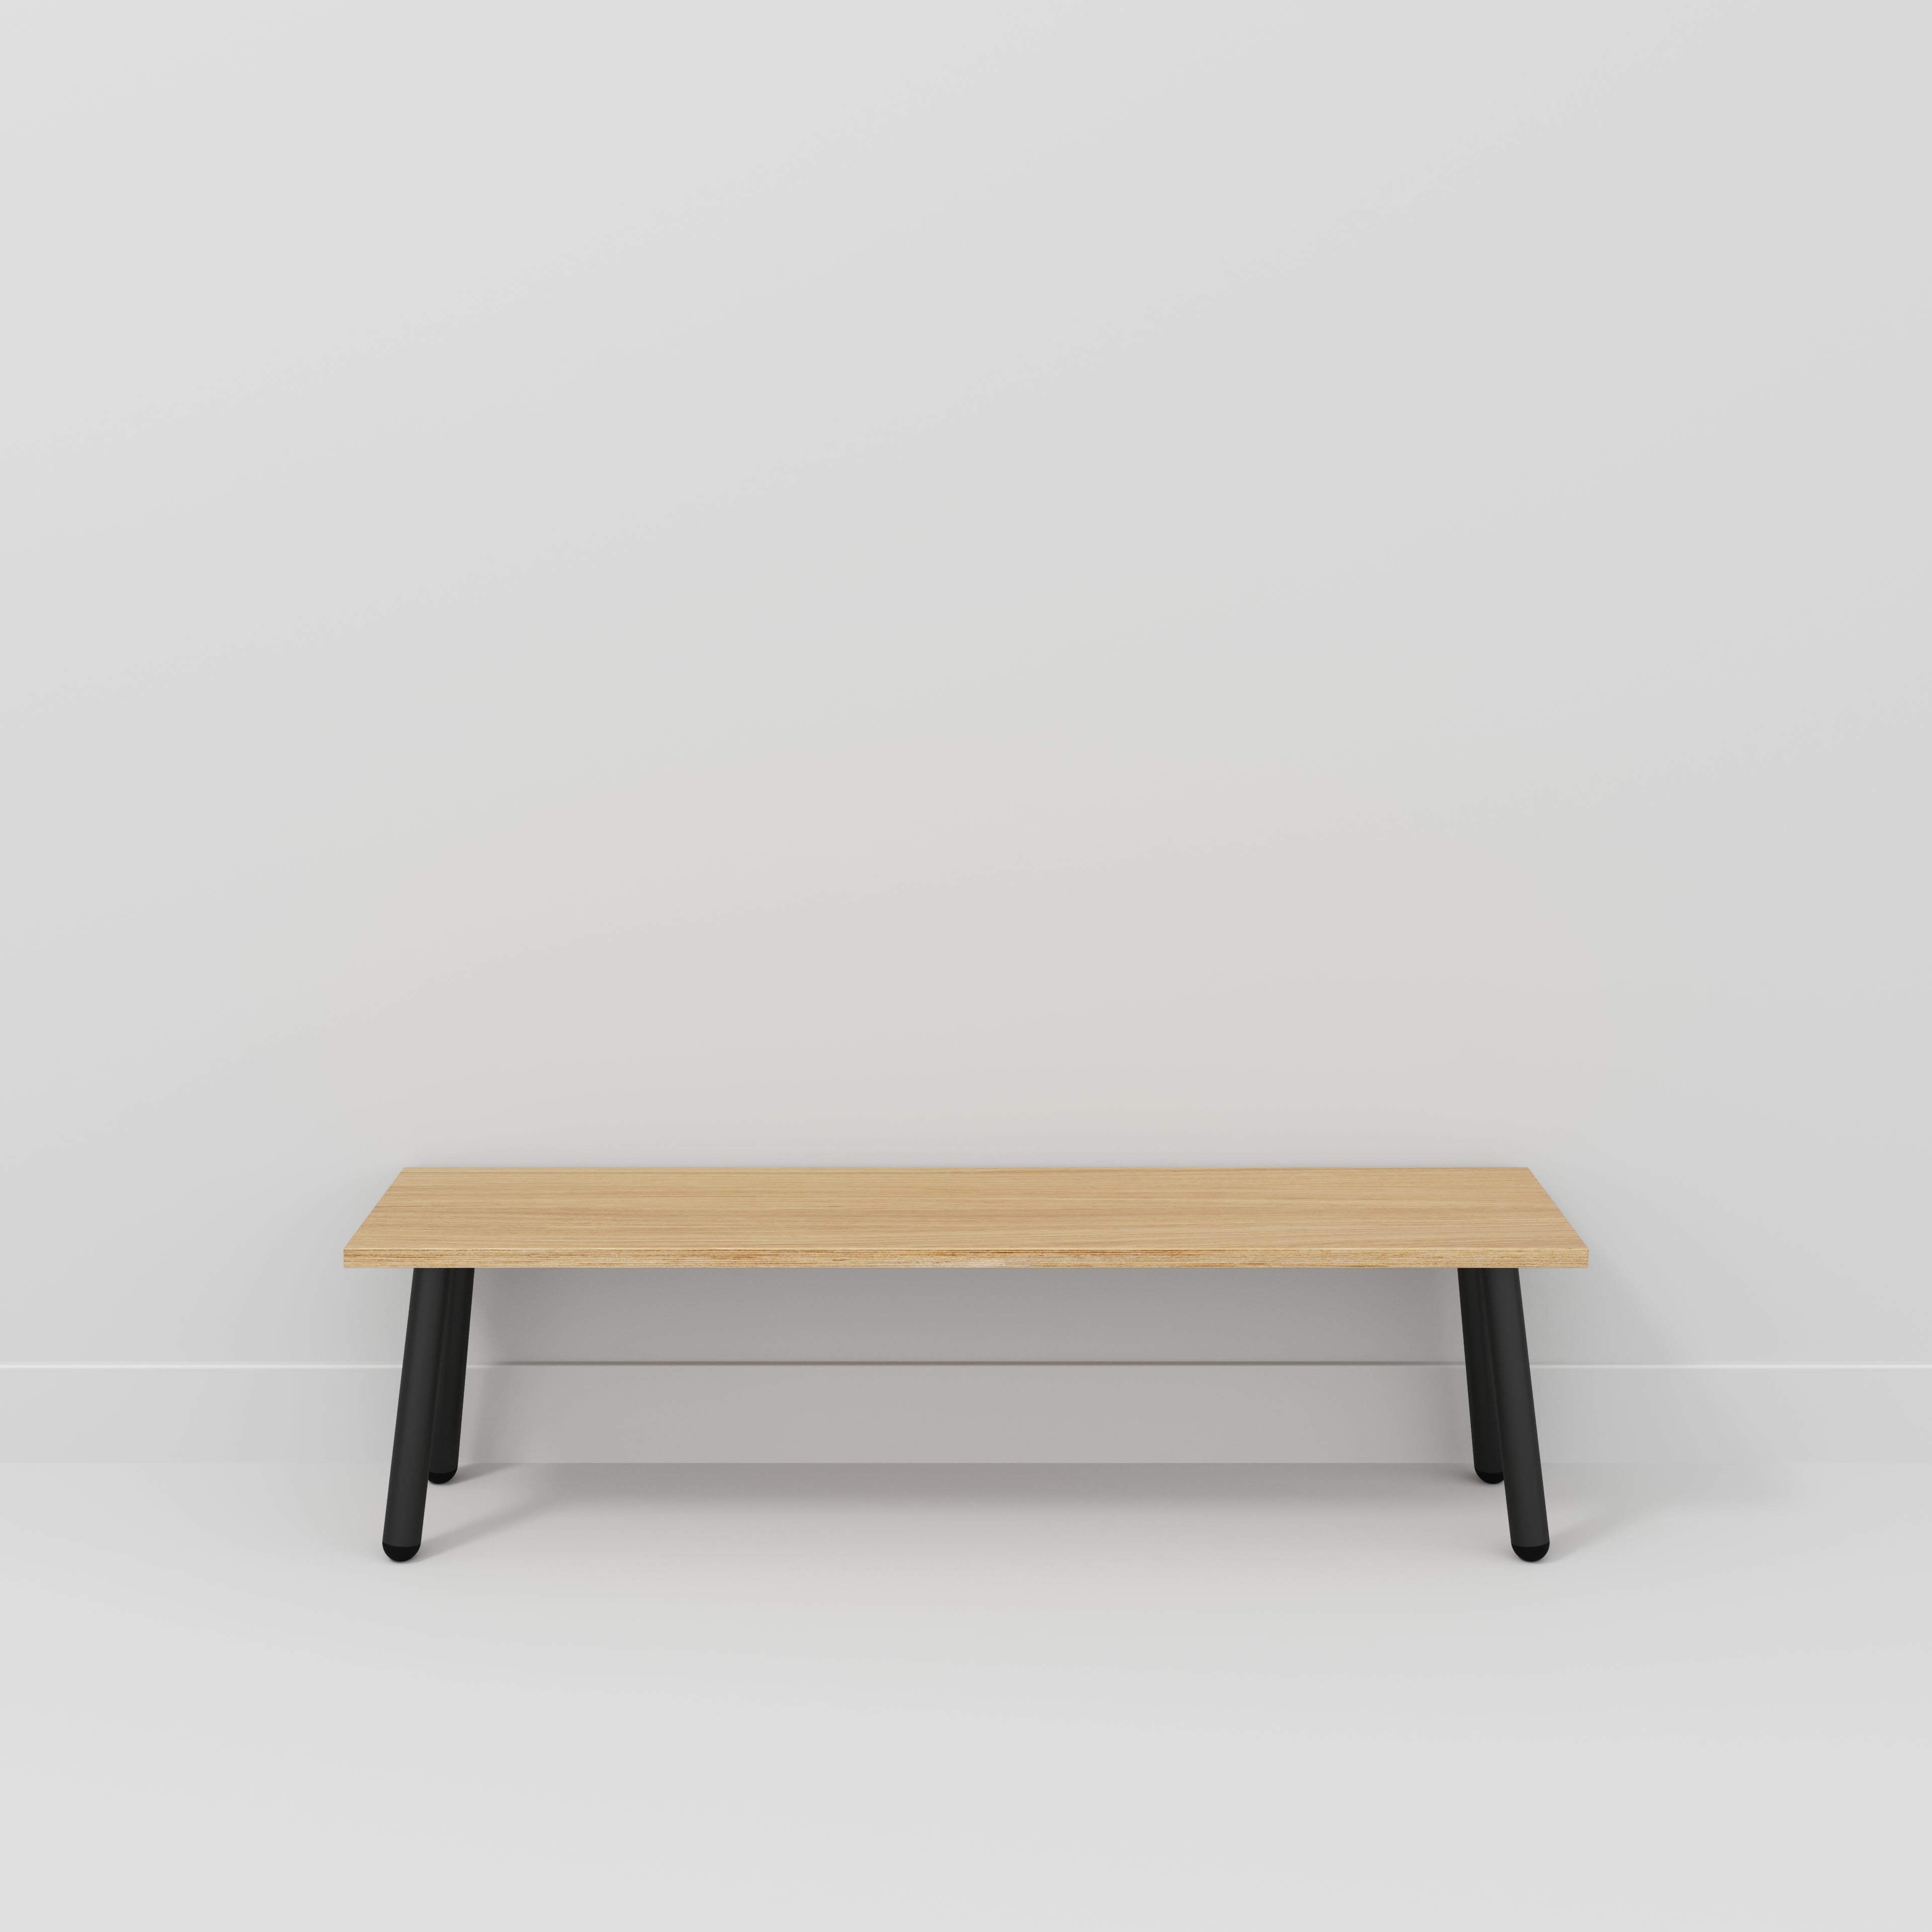 Bench Seat with Black Round Single Pin Legs - Plywood Oak - 1600(w) x 400(d)